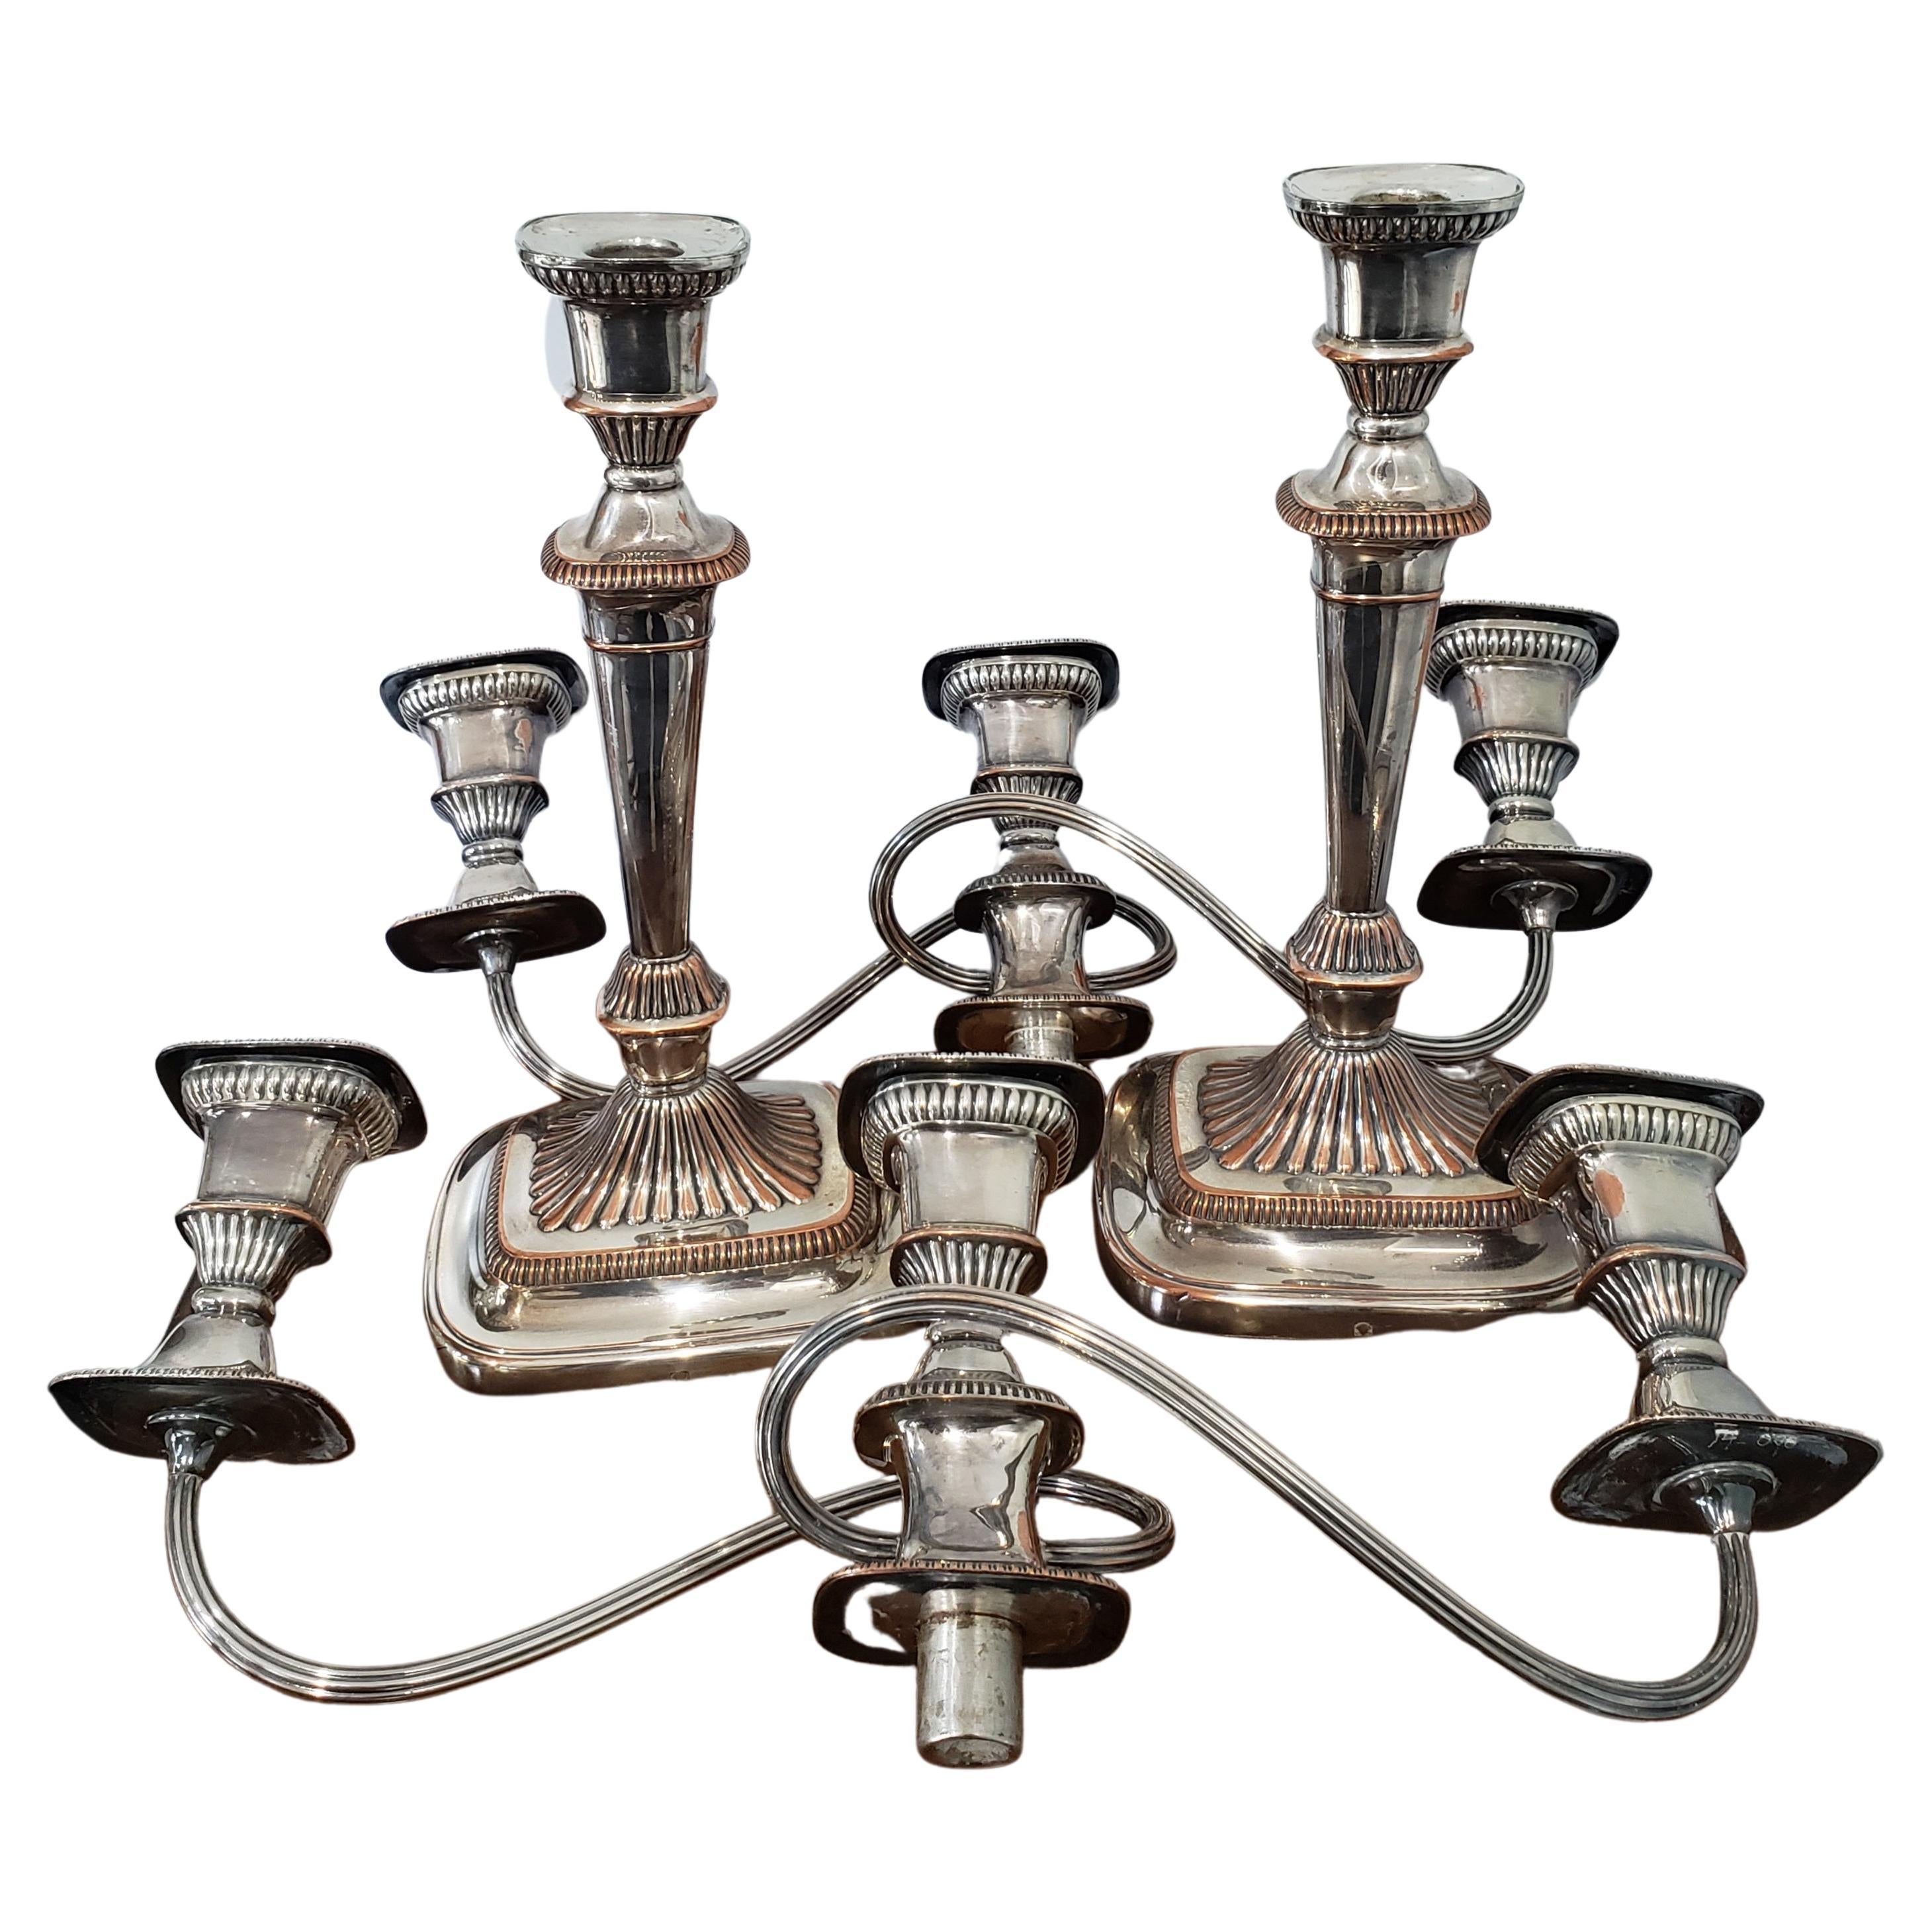 Metalwork Pair of Sheffield Silverplated Convertible Three Light Candelabras, Circa 1840s For Sale